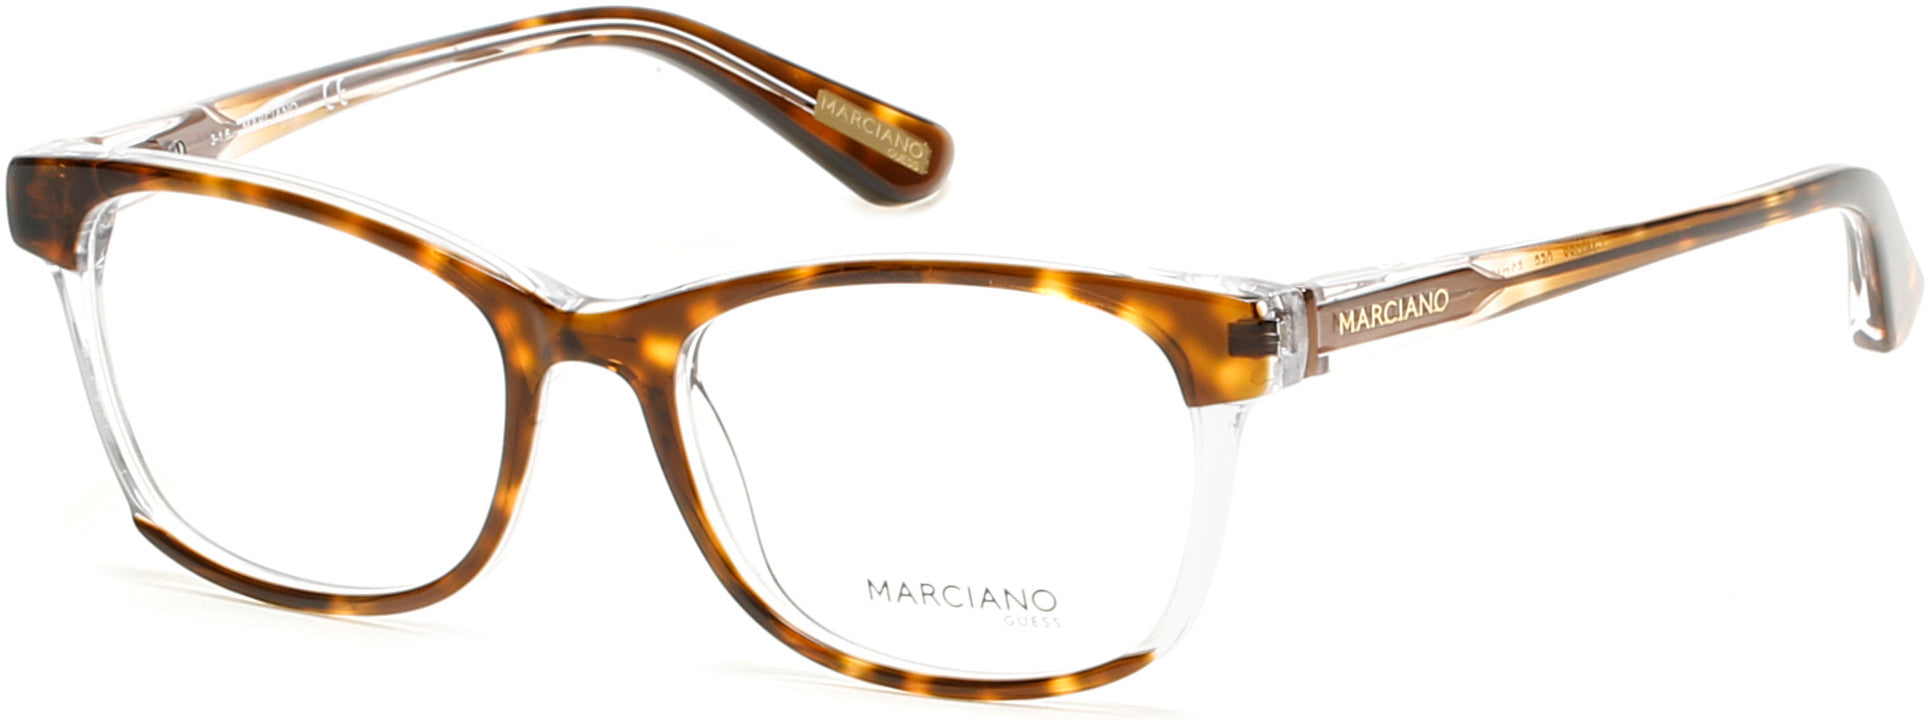 Guess By Marciano GM0288 Geometric Eyeglasses 056-056 - Havana/other